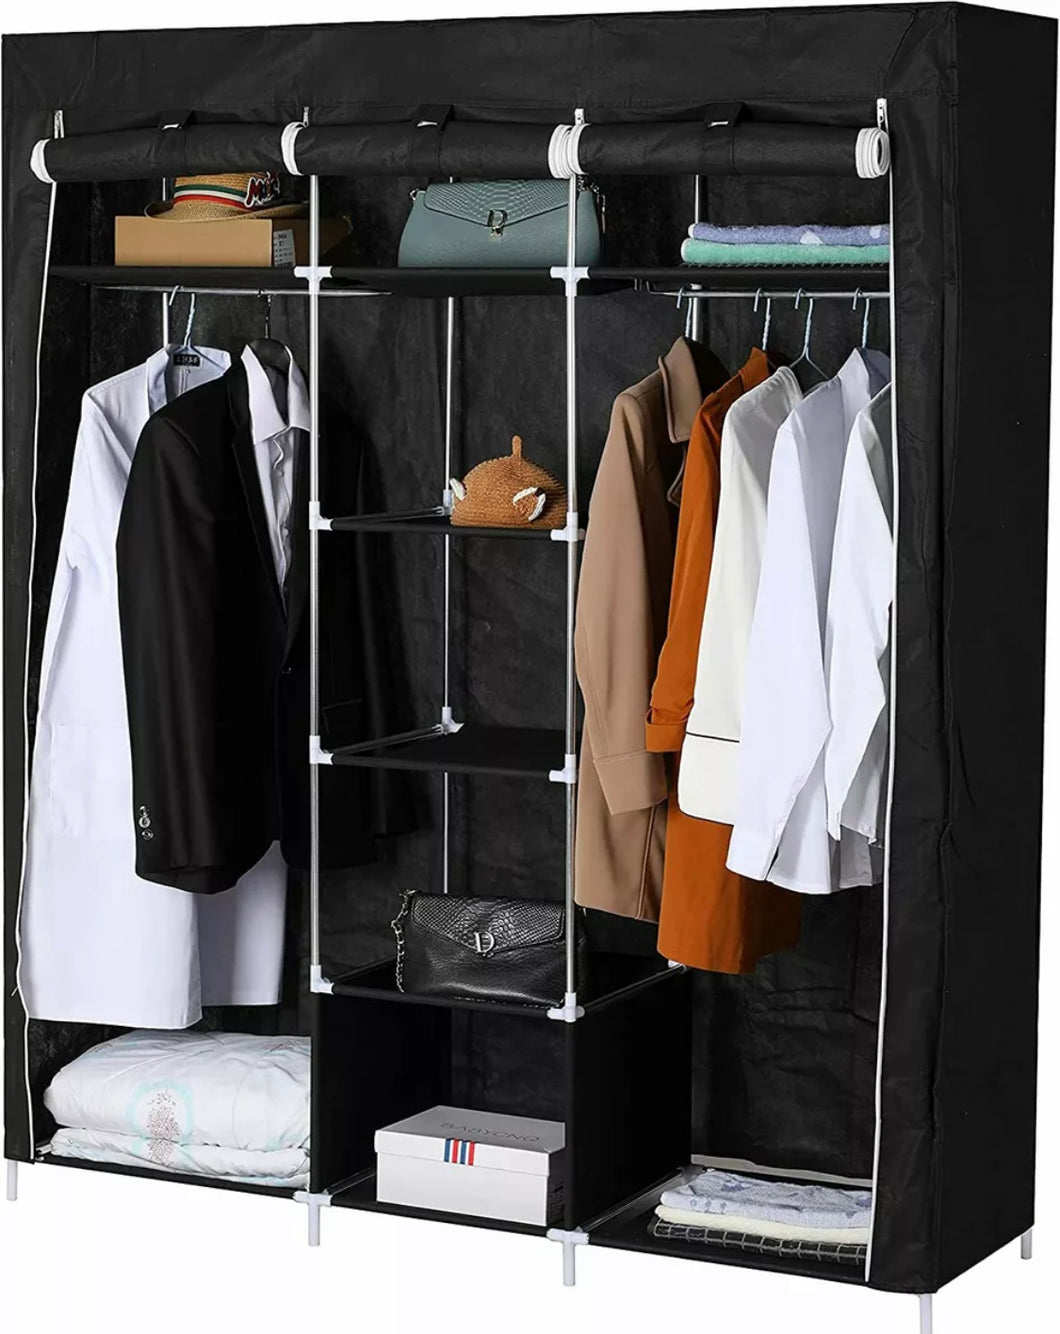 Free Standing Canvas Covered Wardrobe Clothes Rail Storage Rack